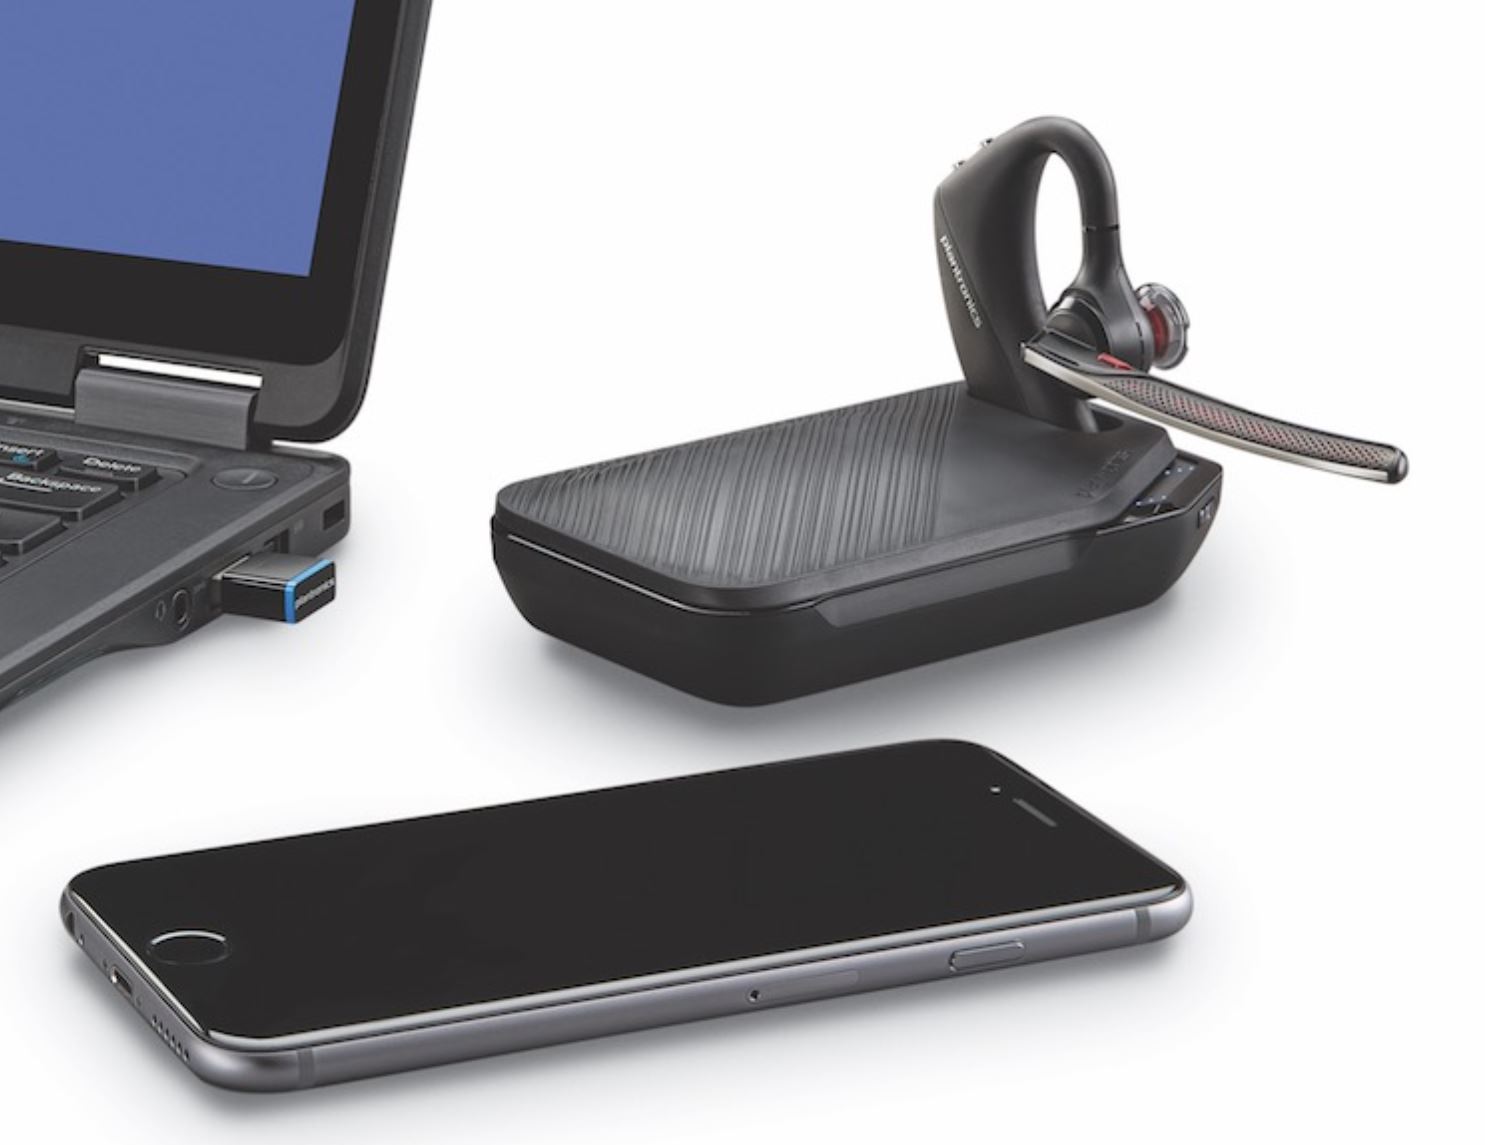 Plantronics Voyager 5200 UC Bluetooth Headset - Click Image to Close